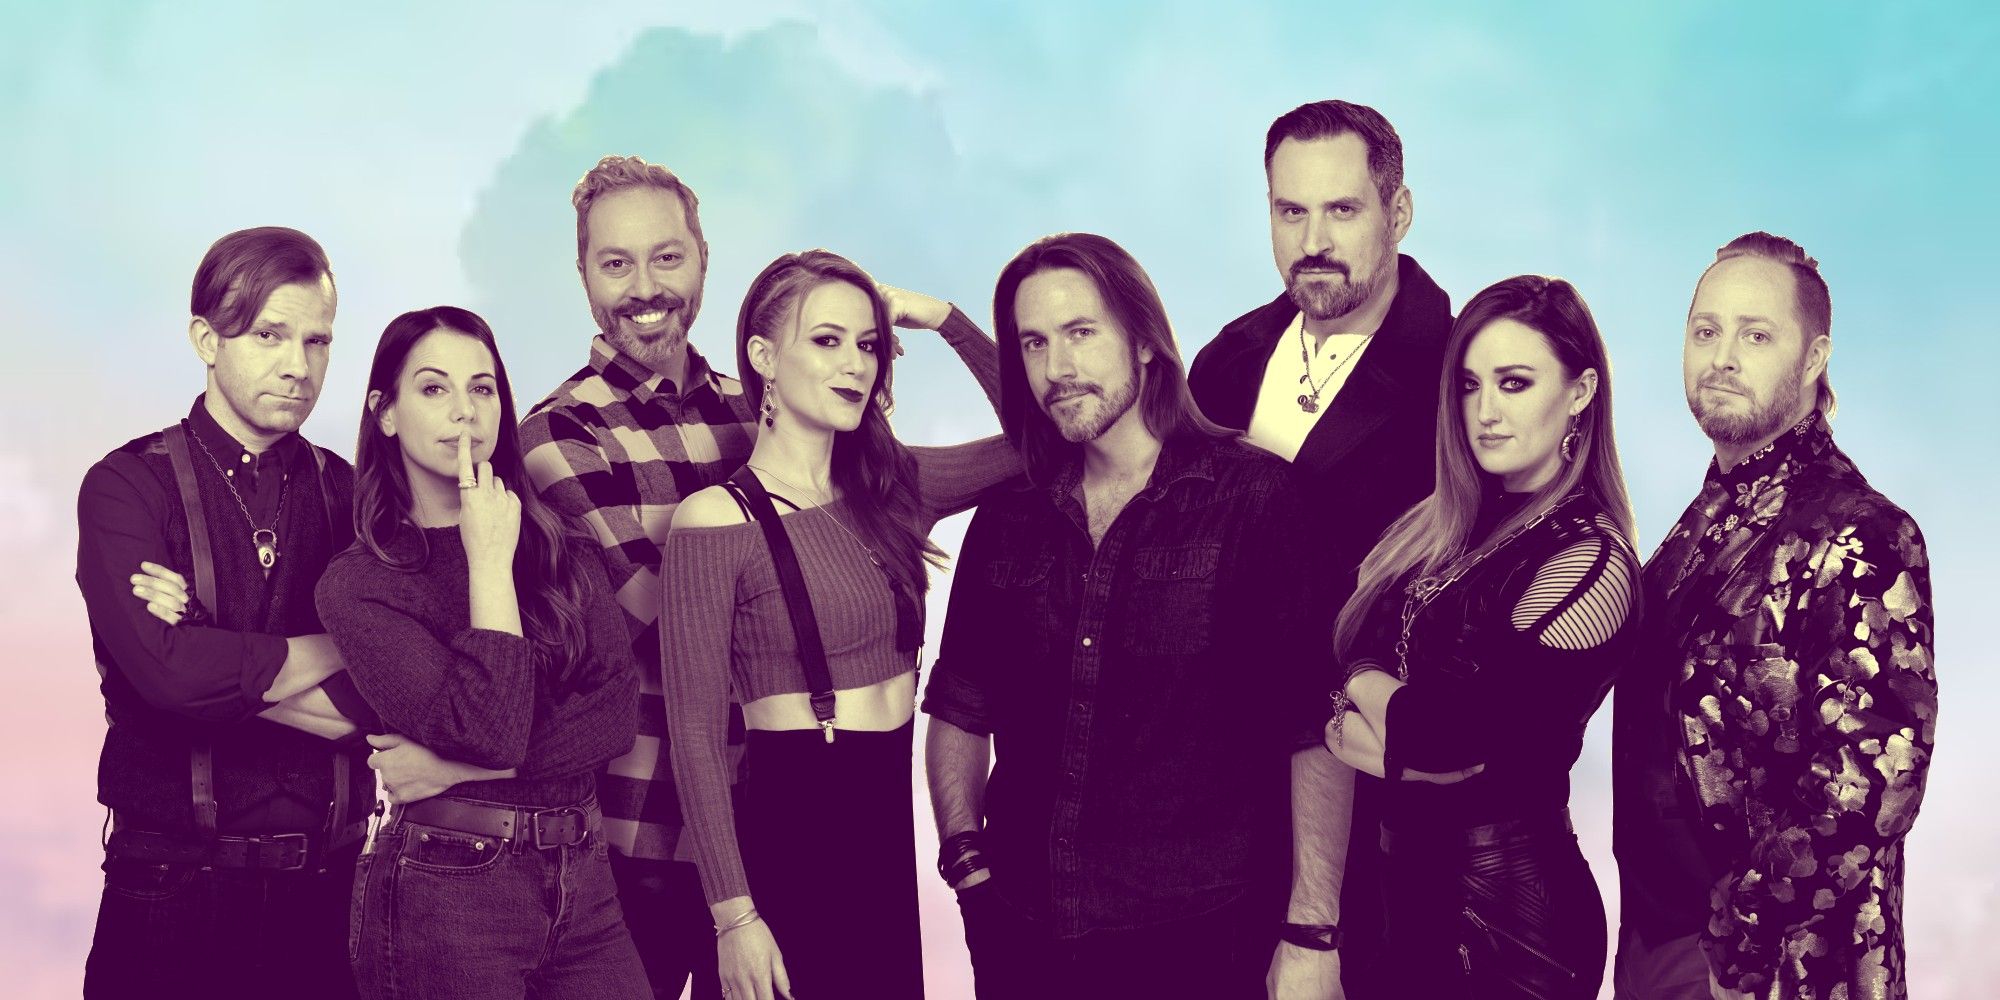 The cast of Critical Role against a pastel background